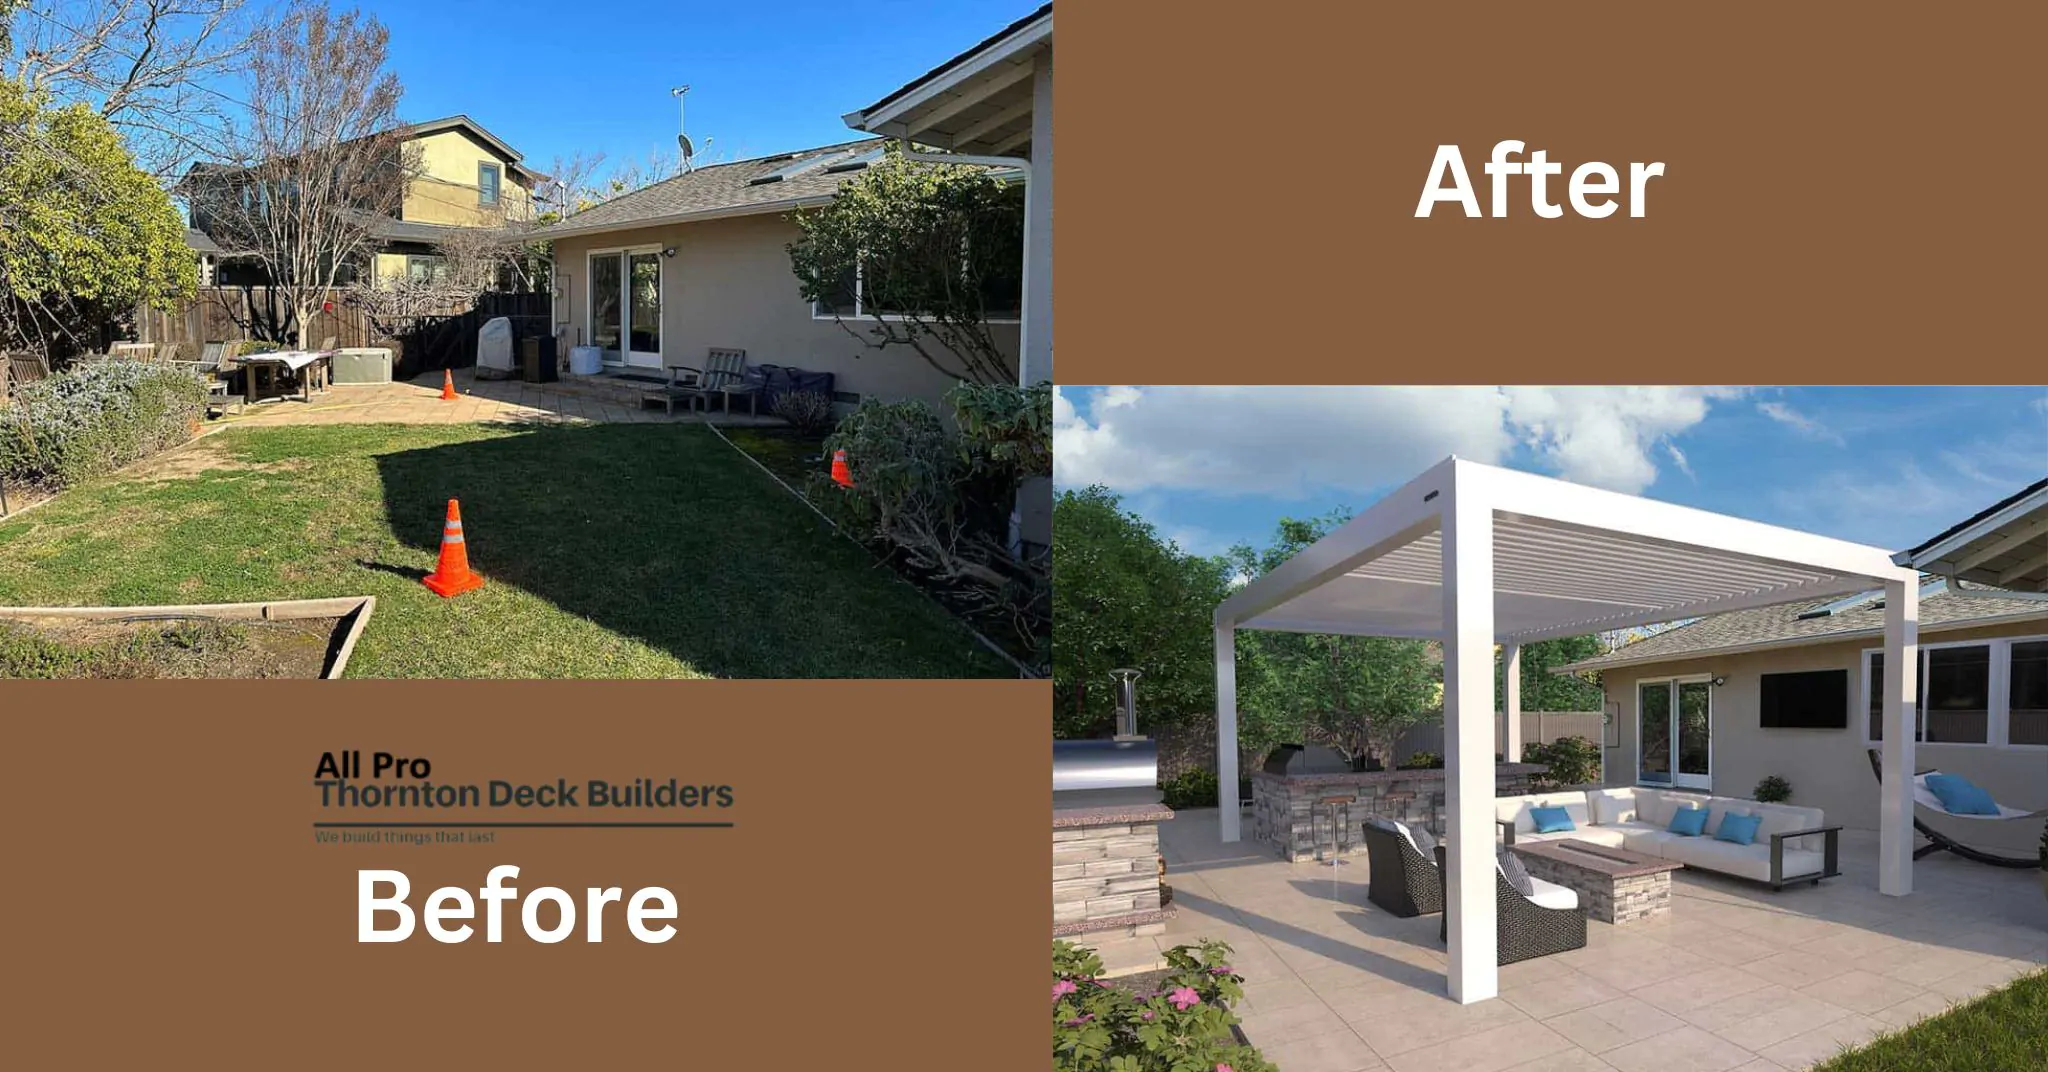 Shade Structures Installation - All Pro Thornton Deck Builders